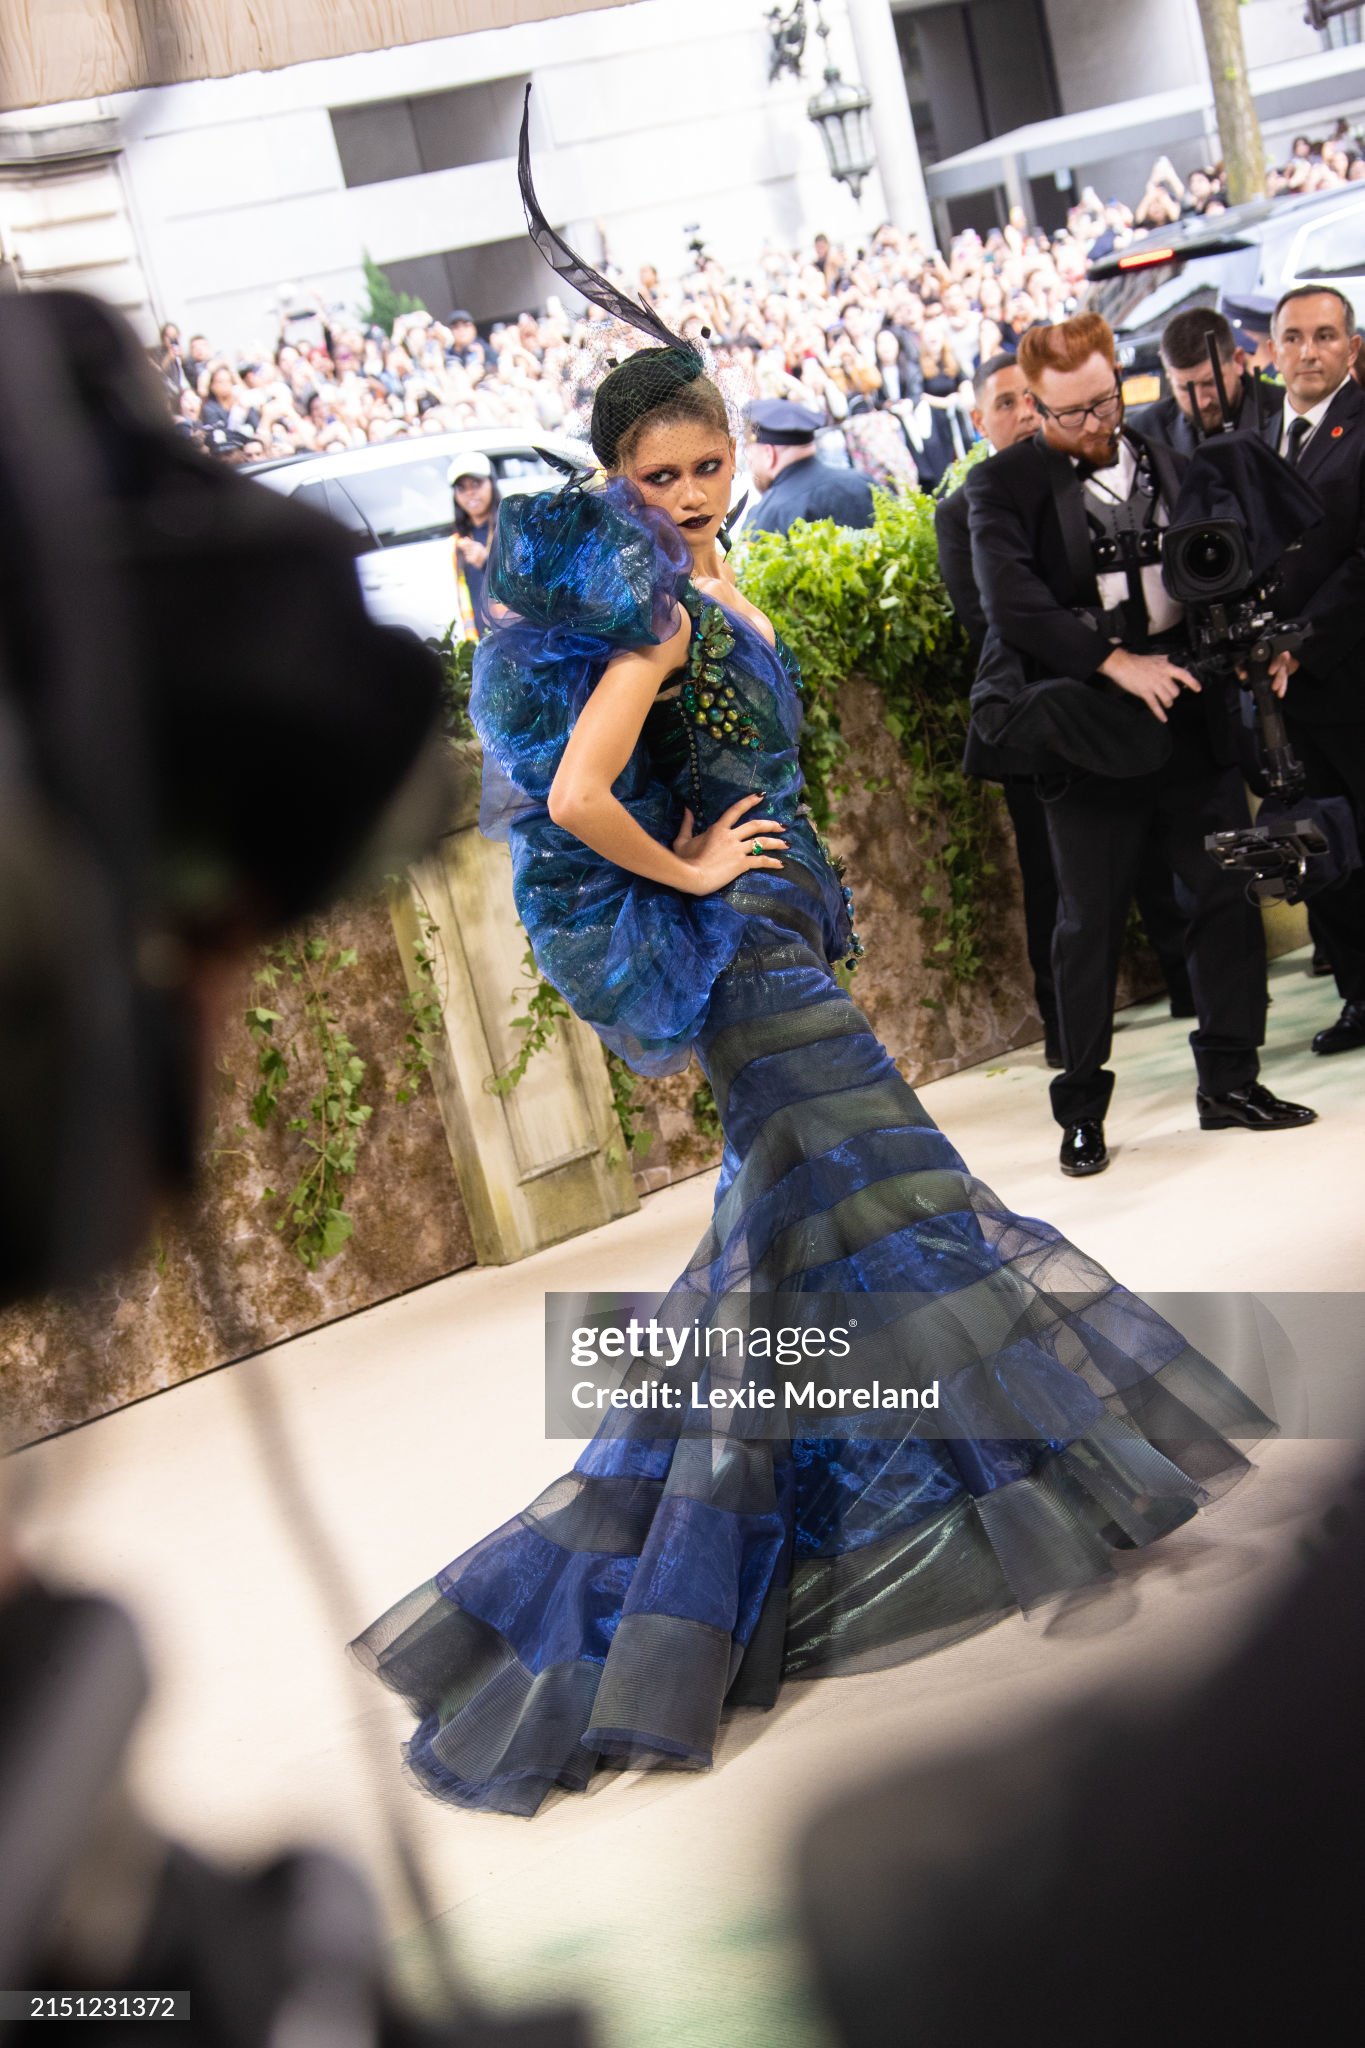 gettyimages-2151231372-2048x2048.jpg